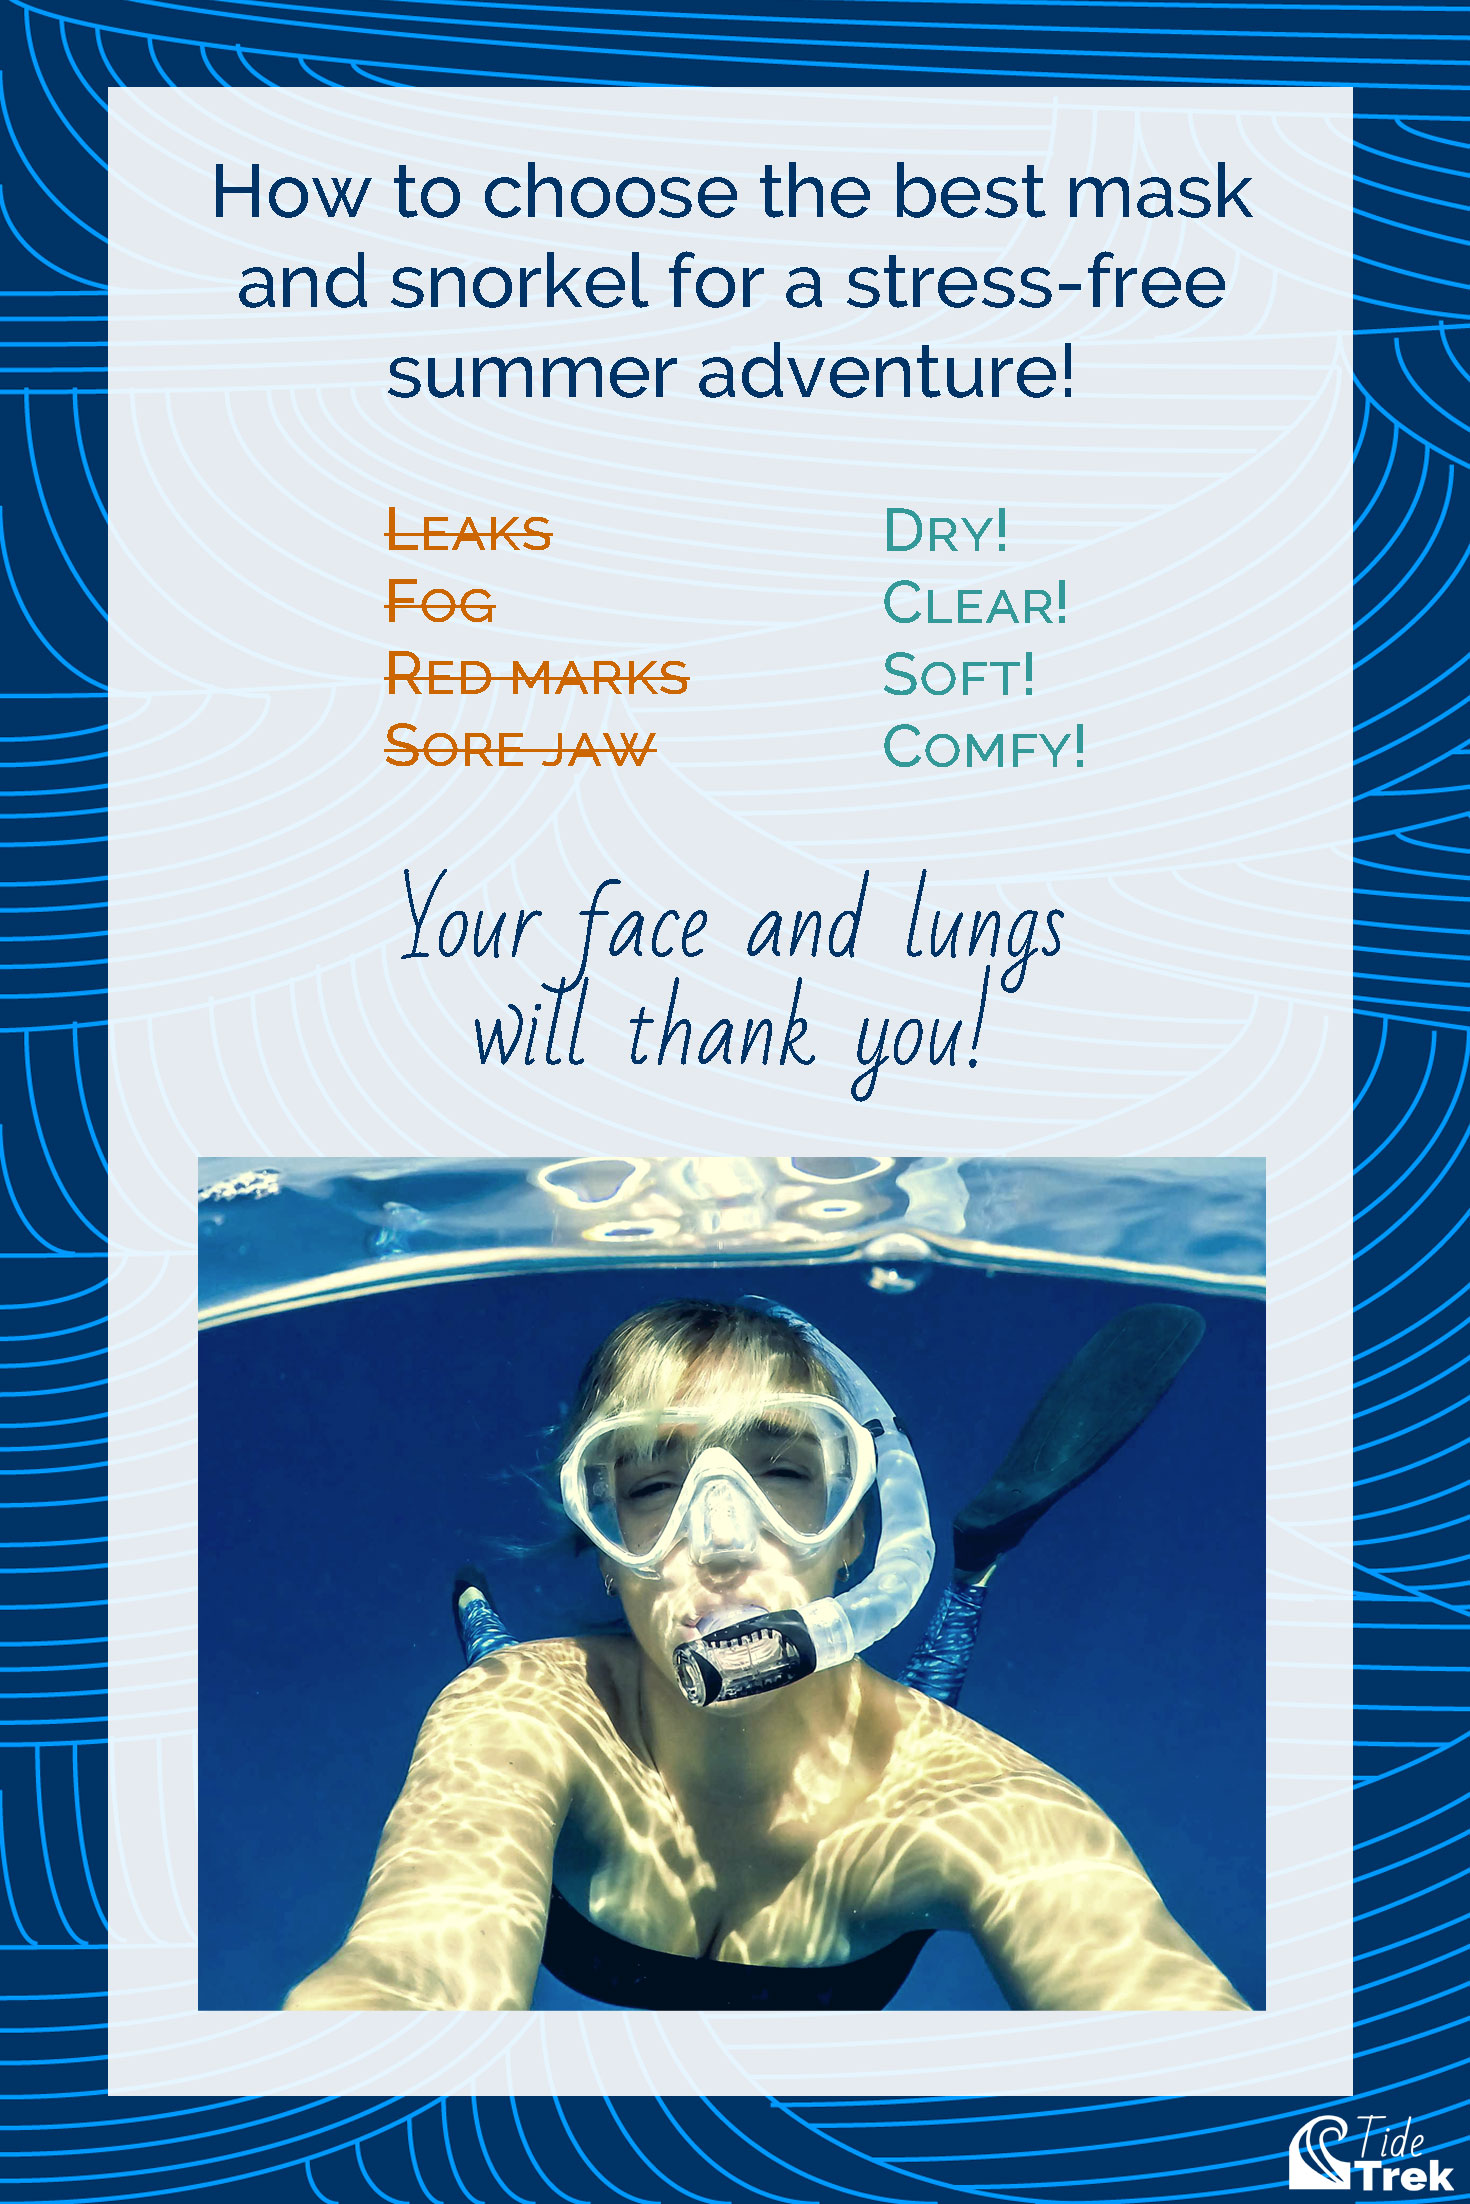 Photo of a woman wearing a mask and snorkel underwater with text overlay saying how to choose the best mask and snorkel